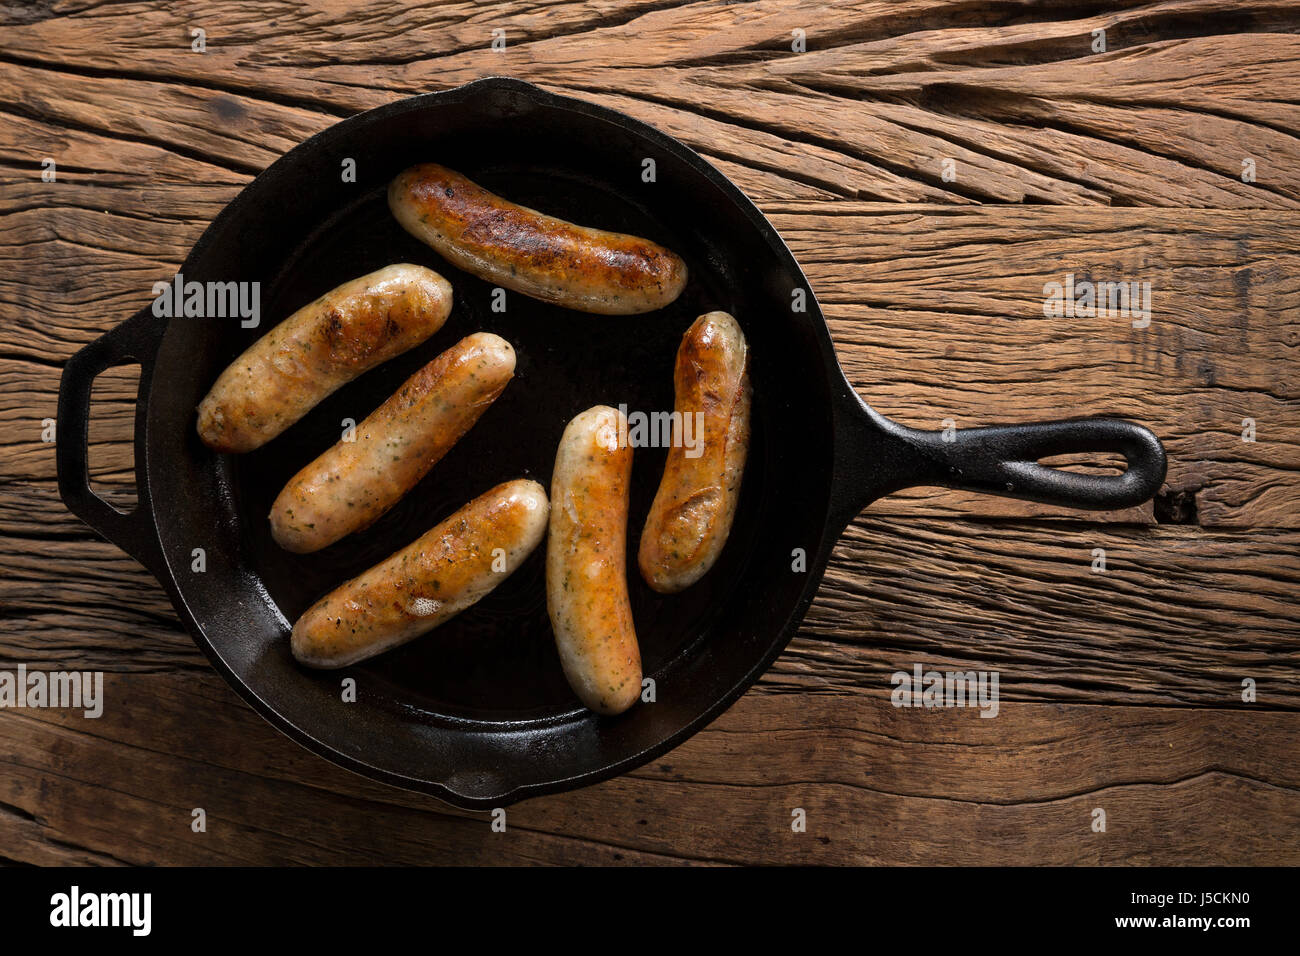 Gourmet butchers sausages in a frying pan, on a rustic wooden background. Stock Photo